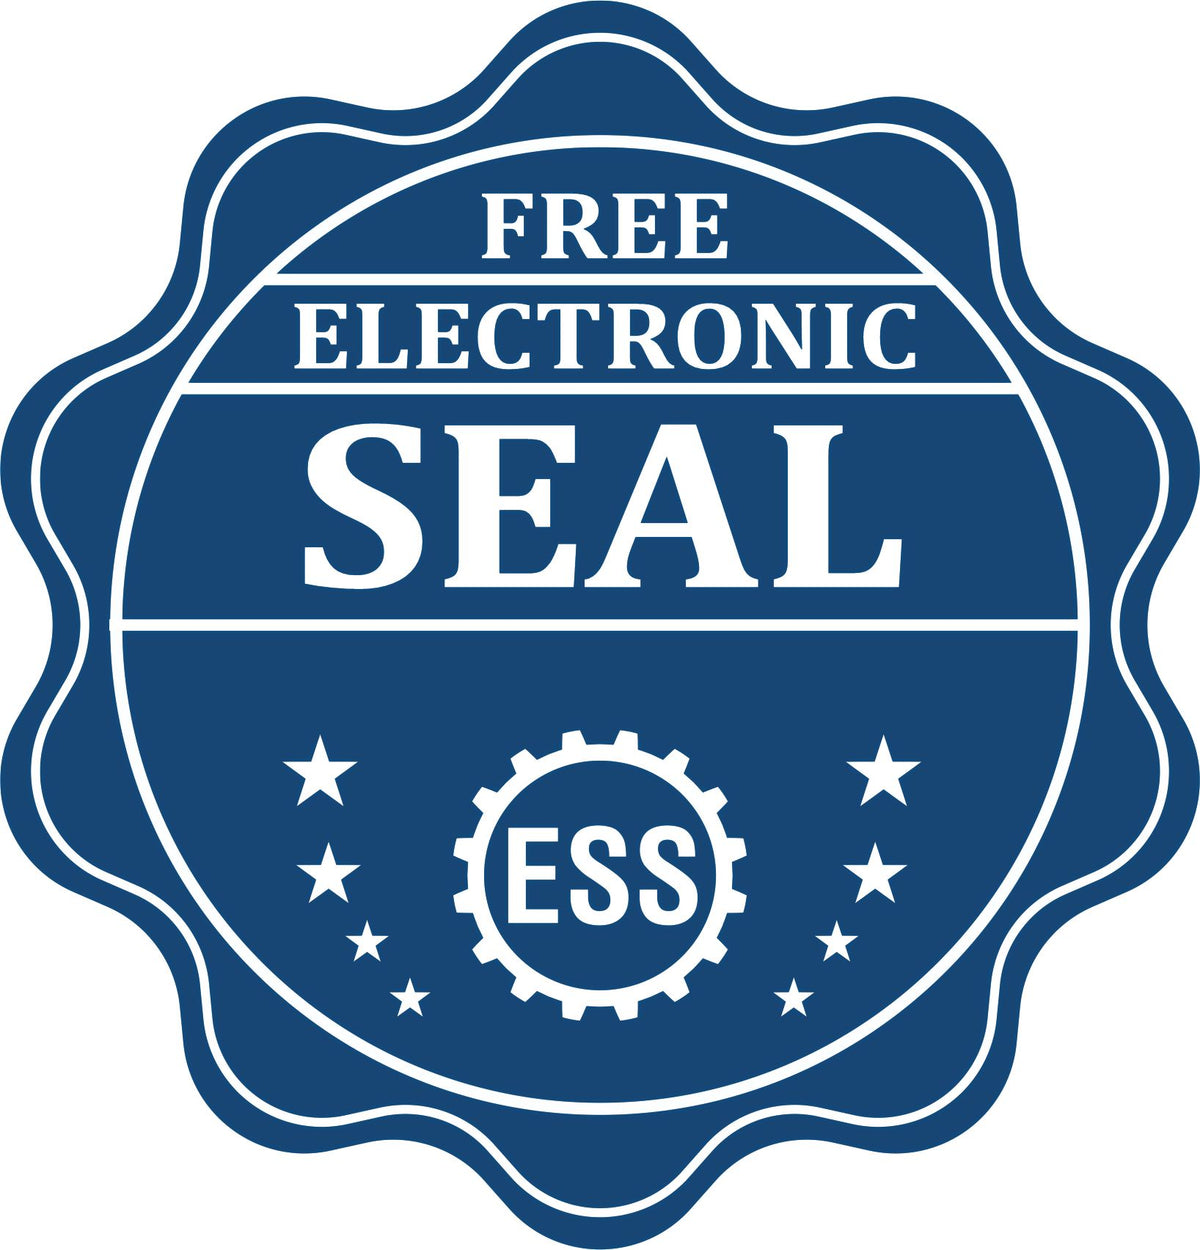 A badge showing a free electronic seal for the North Dakota Professional Engineer Seal Stamp with stars and the ESS gear on the emblem.